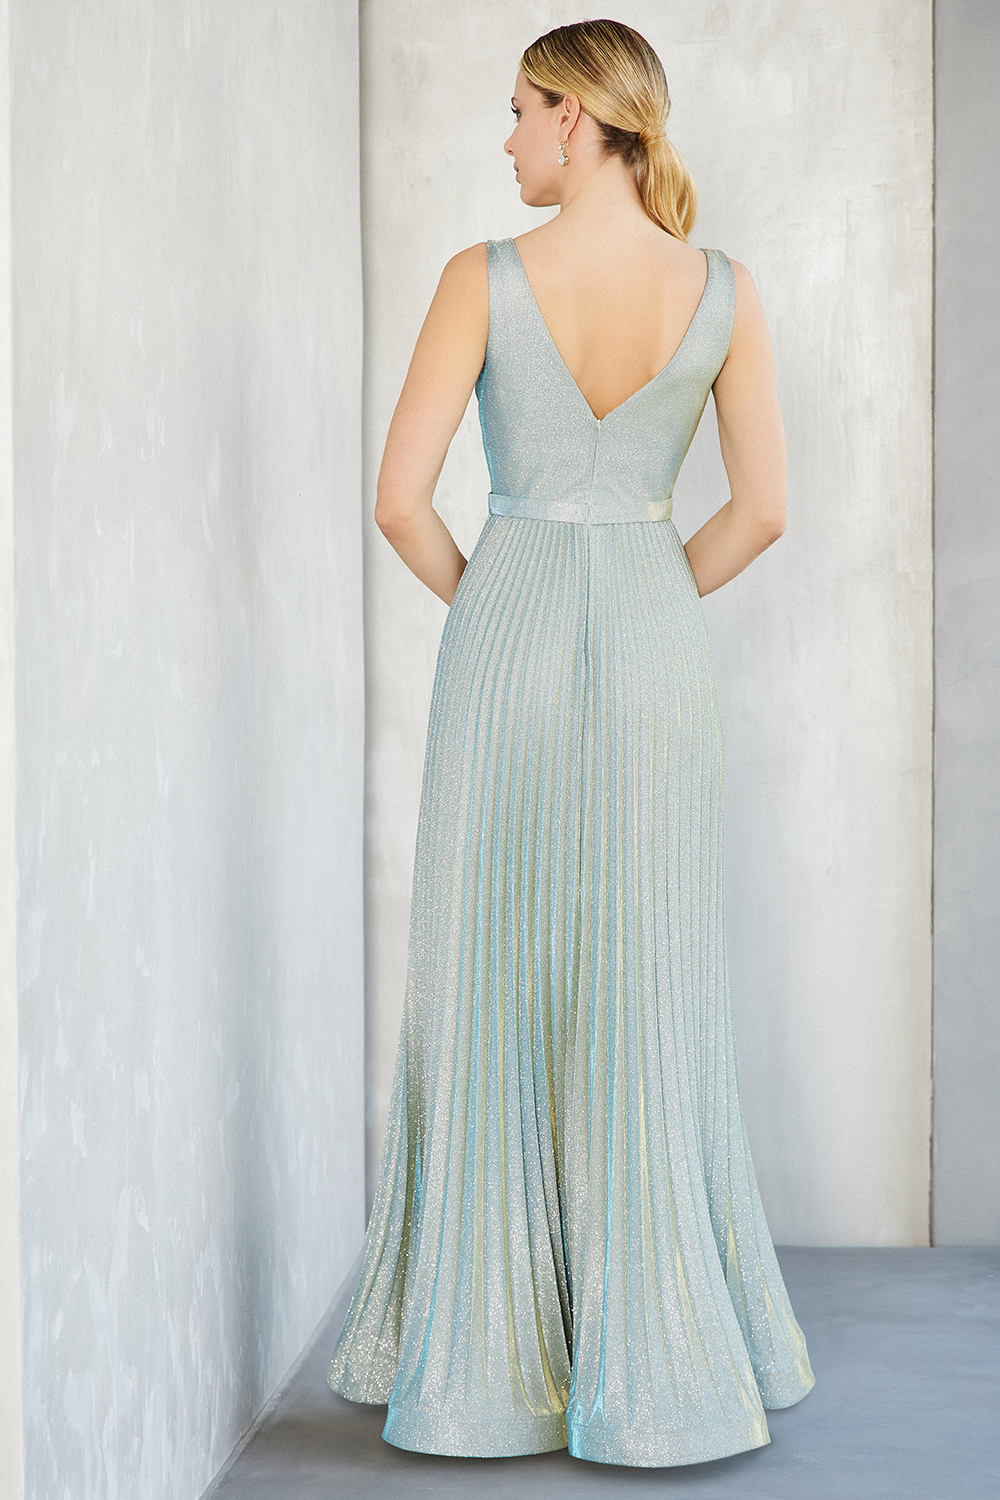 Классические платья / Long cocktail pleated dress with shining fabric and wide straps